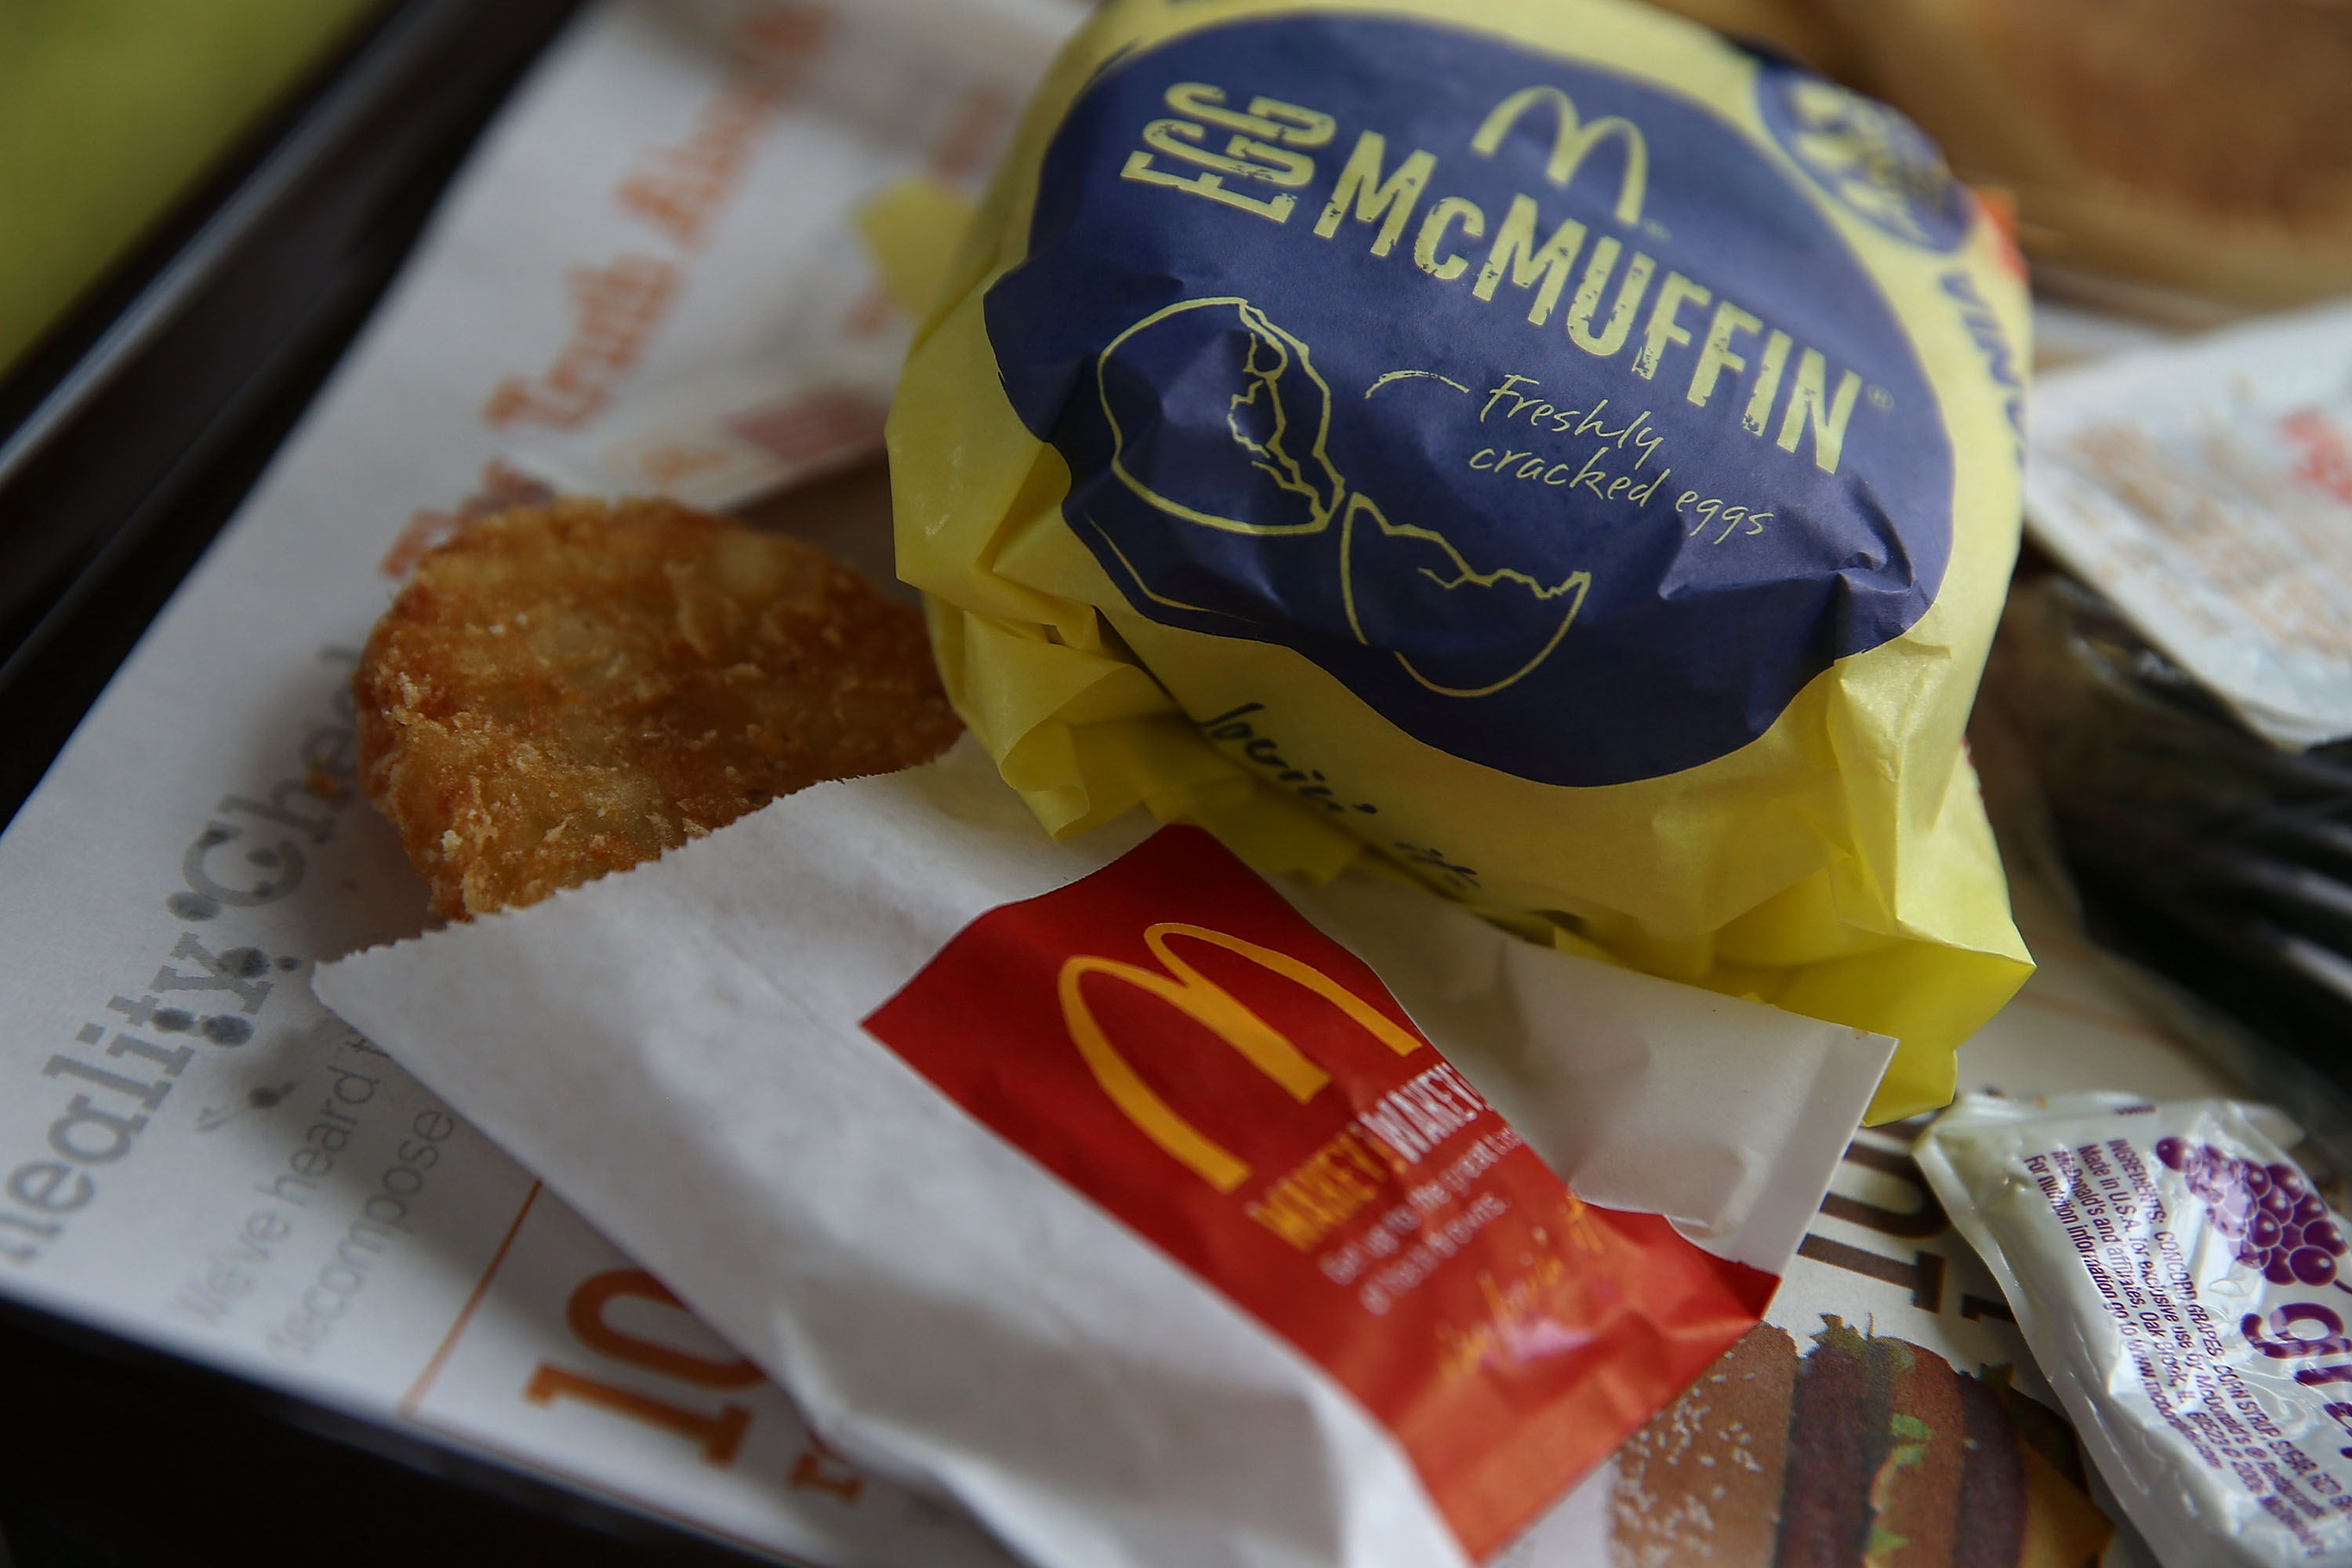 A McDonald's Egg McMuffin and hash browns are displayed at a McDonald's restaurant on July 23, 2015 in Fairfield, California. (Justin Sullivan&mdash;Getty Images)